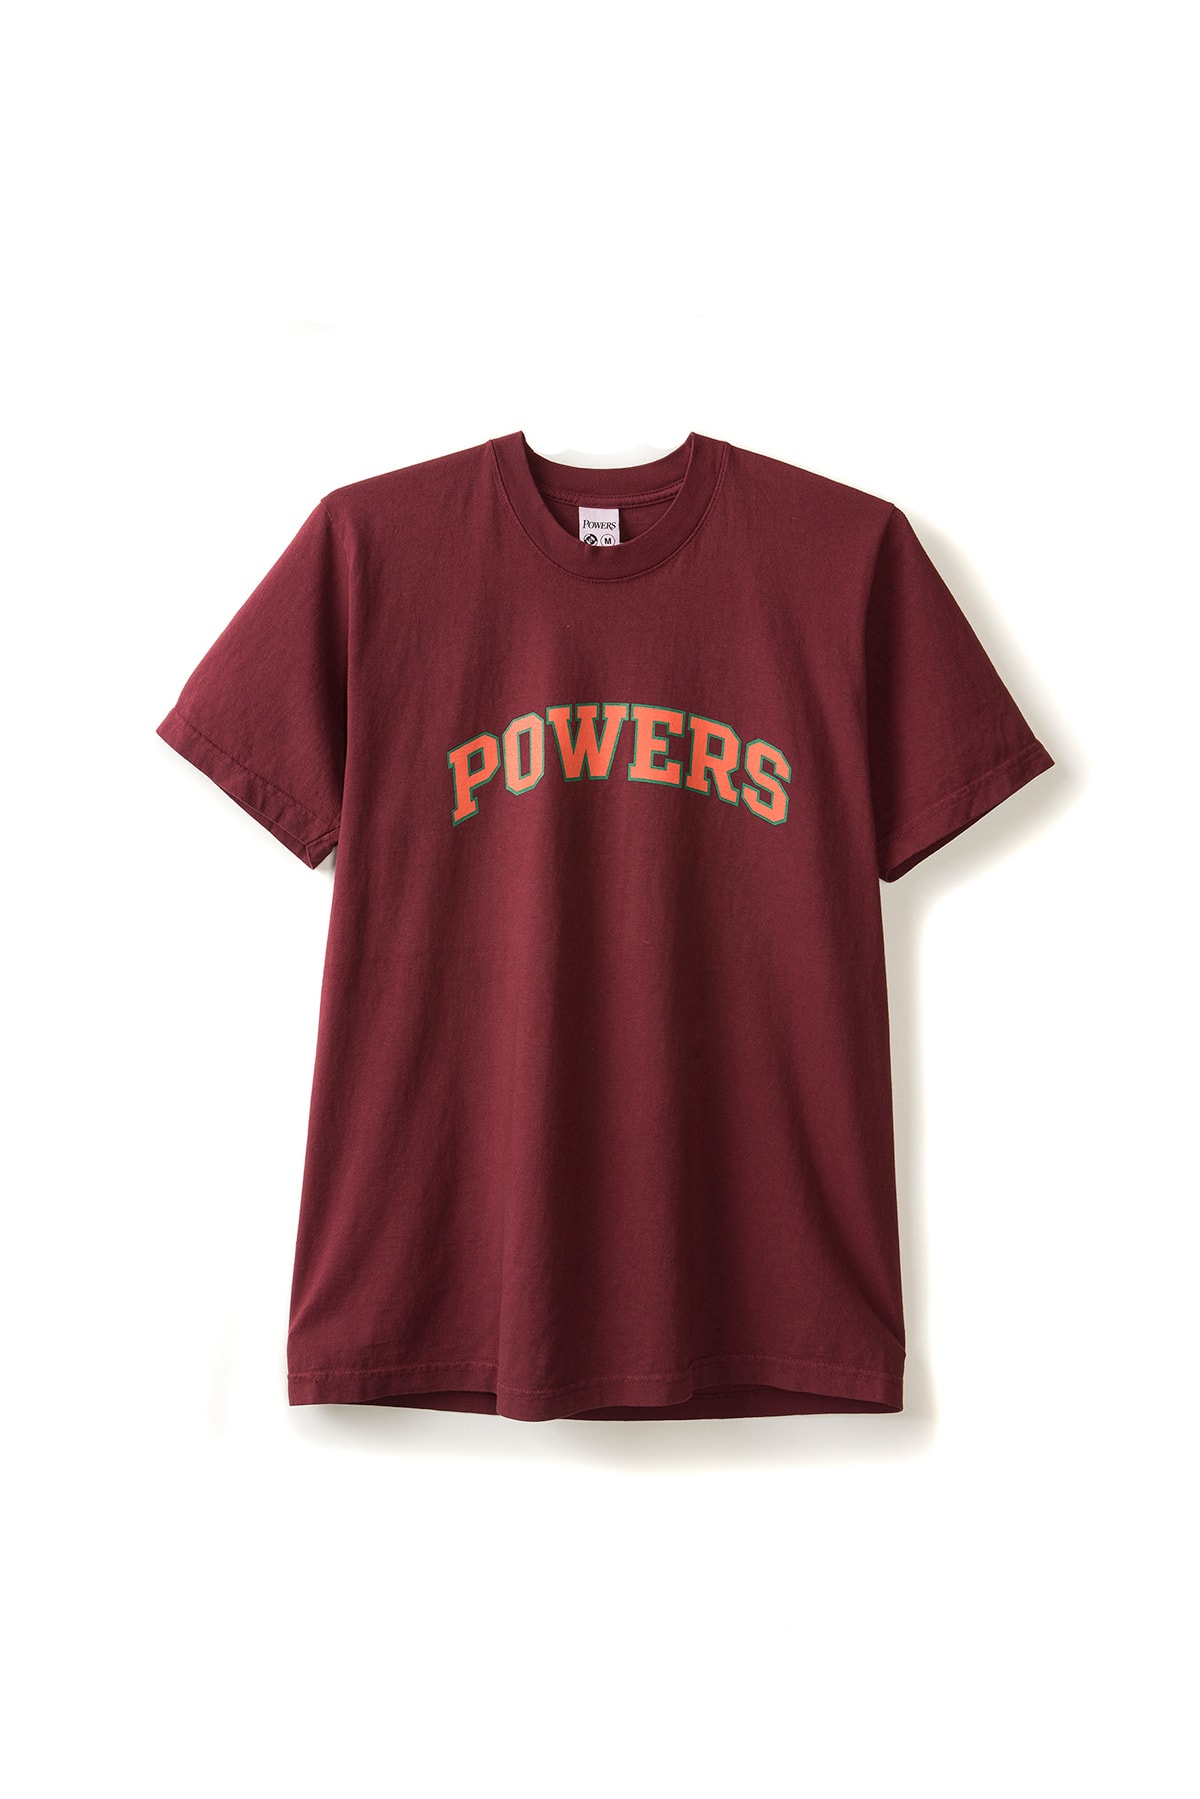 Powers Supply 4th Drop: Tees, Hoodies, Accessories Pirelli Pi Japanese Character